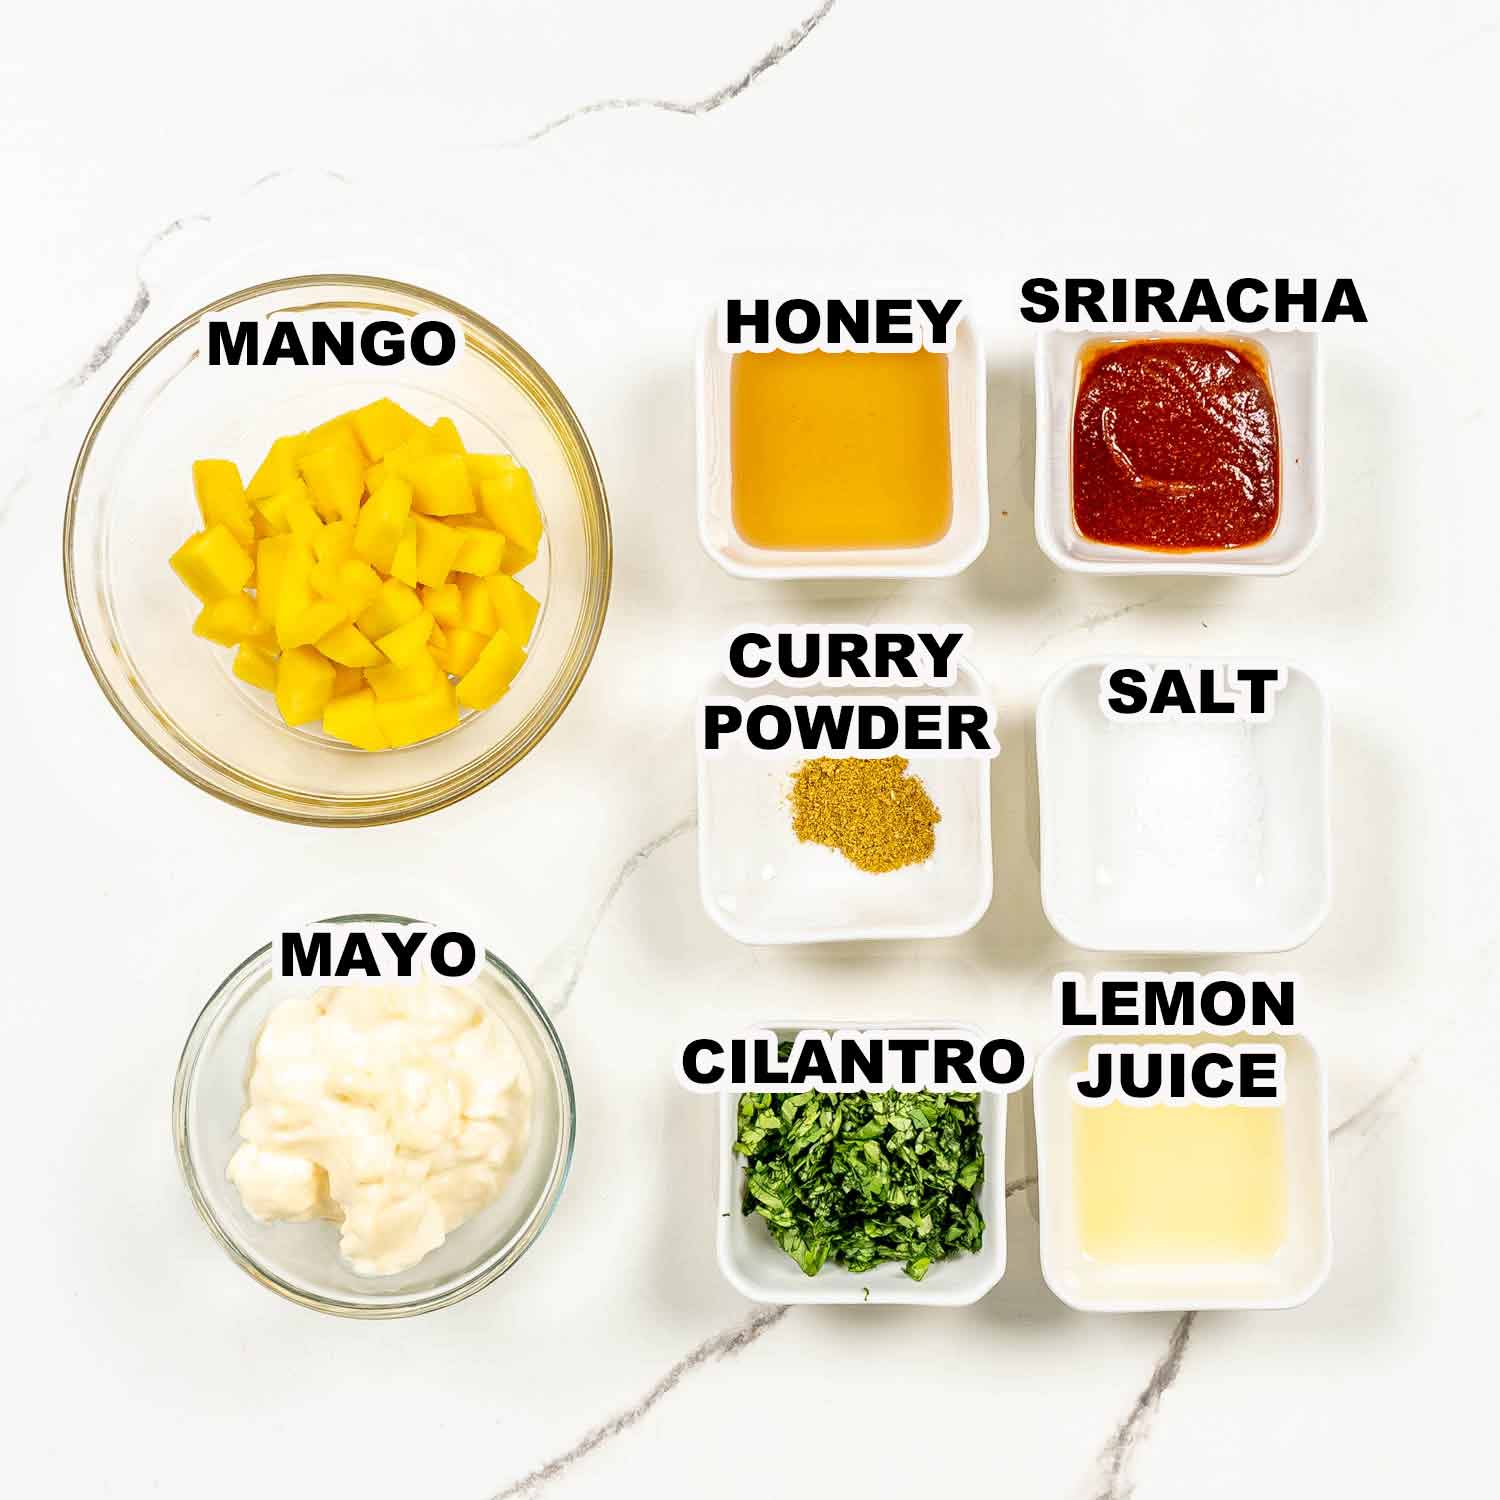 ingredients needed to make spicy mango dipping sauce.